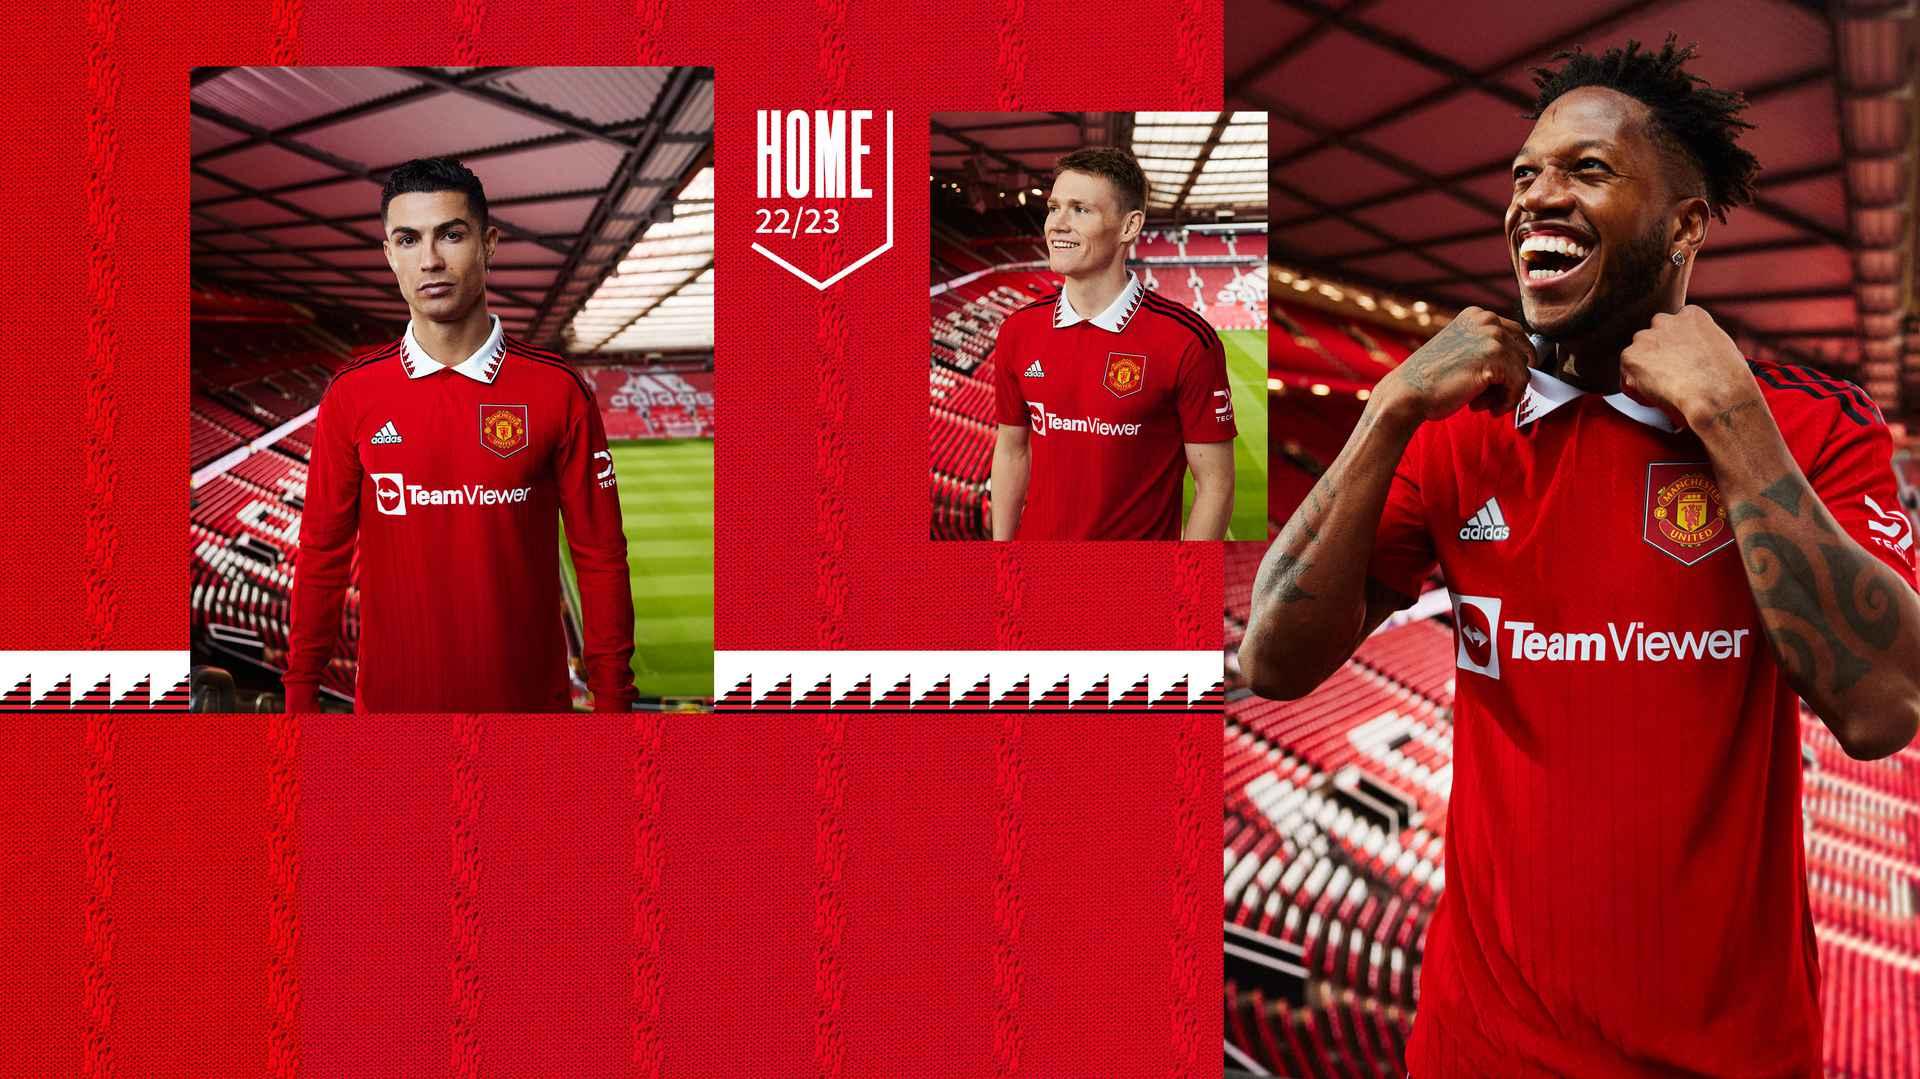 Man Utd And Adidas Launch New Home Kit For Season